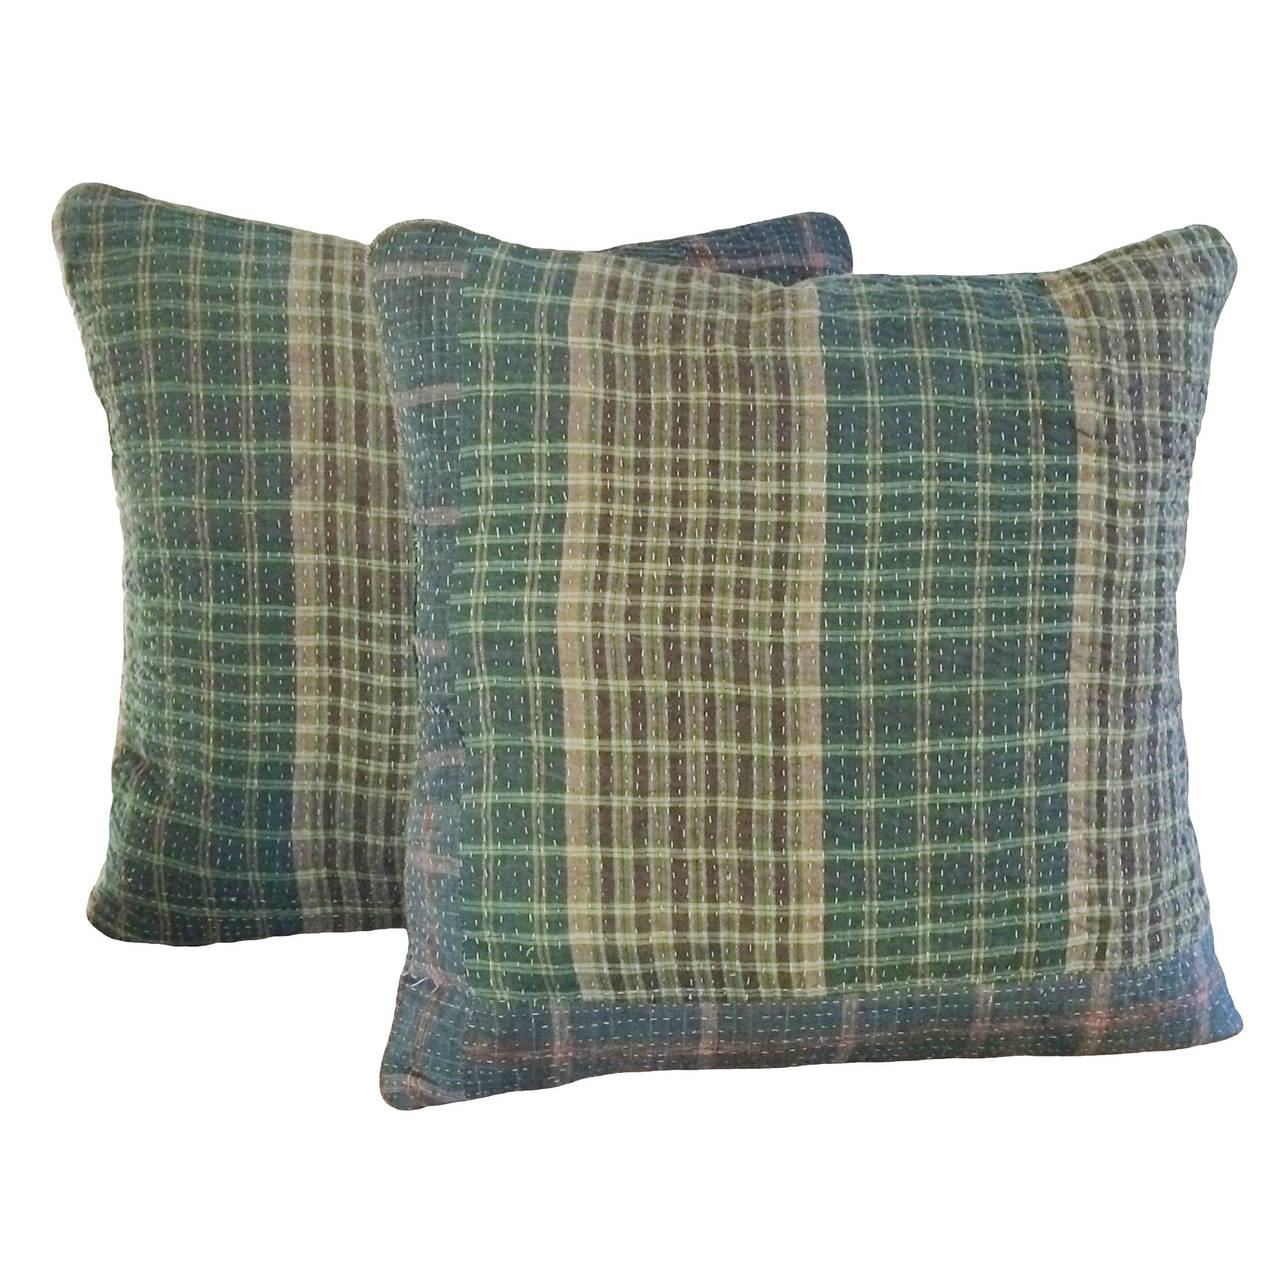 Pair of vintage hand-stitched Kantha custom down pillows; blue-green check pattern on both sides; India; 19th century.